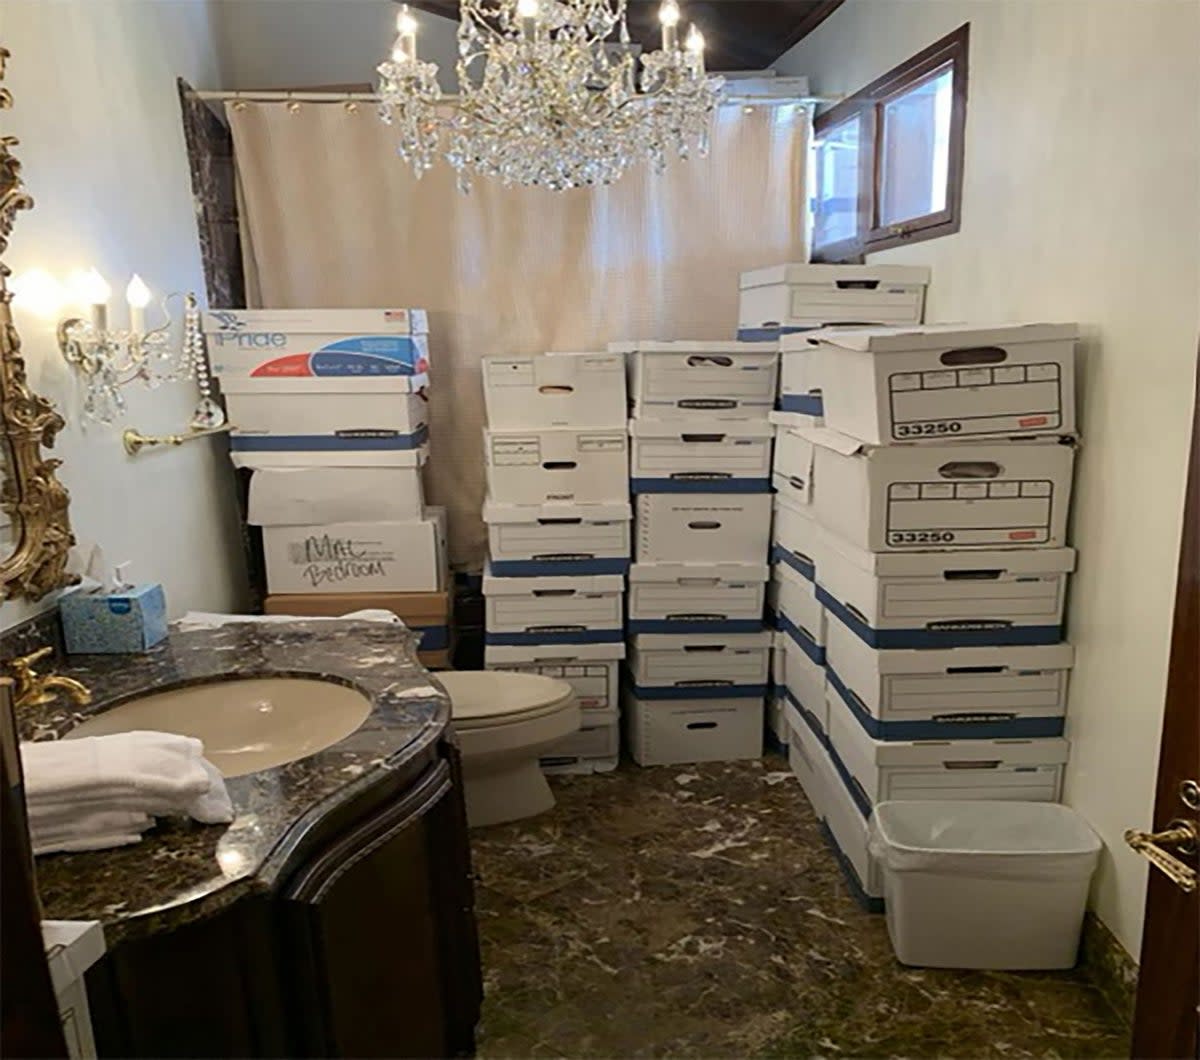 Stacks of boxes can be observed in a bathroom and shower in The Mar-a-Lago Club’s Lake Room at former US President Donald Trump’s Mar-a-Lago estate in Palm Beach, Florida (US Justice Department/AFP via Ge)